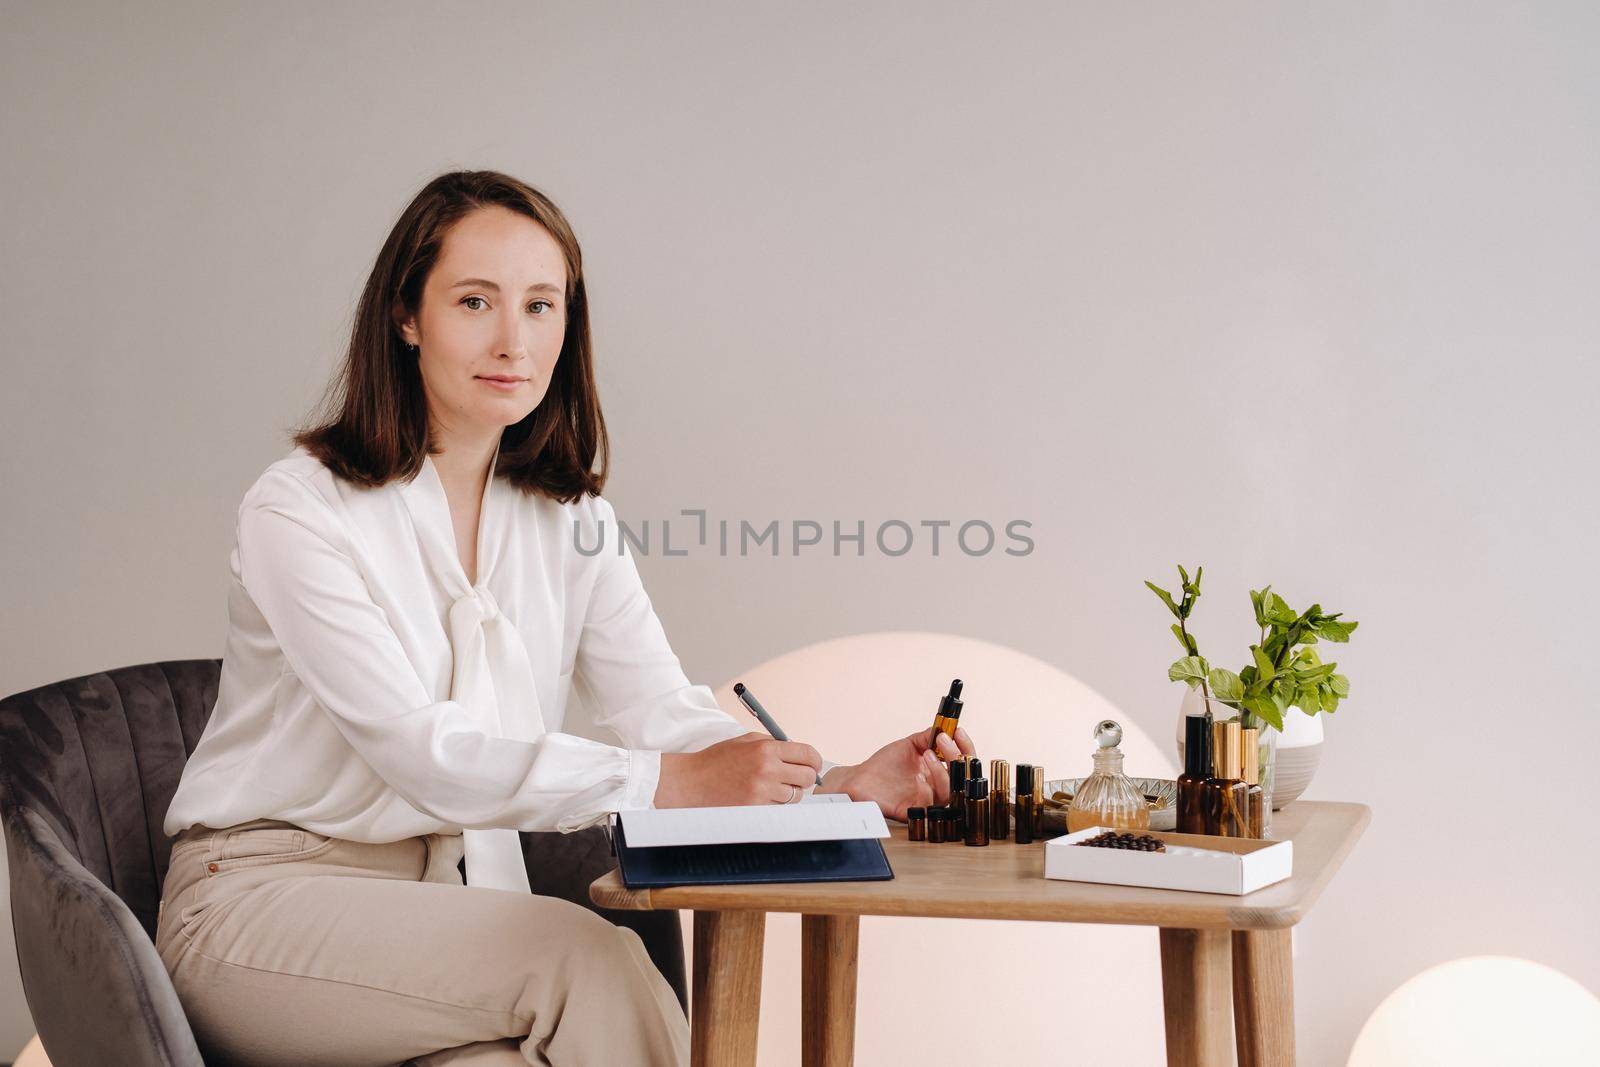 The aromatherapist girl is sitting in her office and holding a bottle of aromatic oil in her hands and writing something down. there are essential oils on the table.